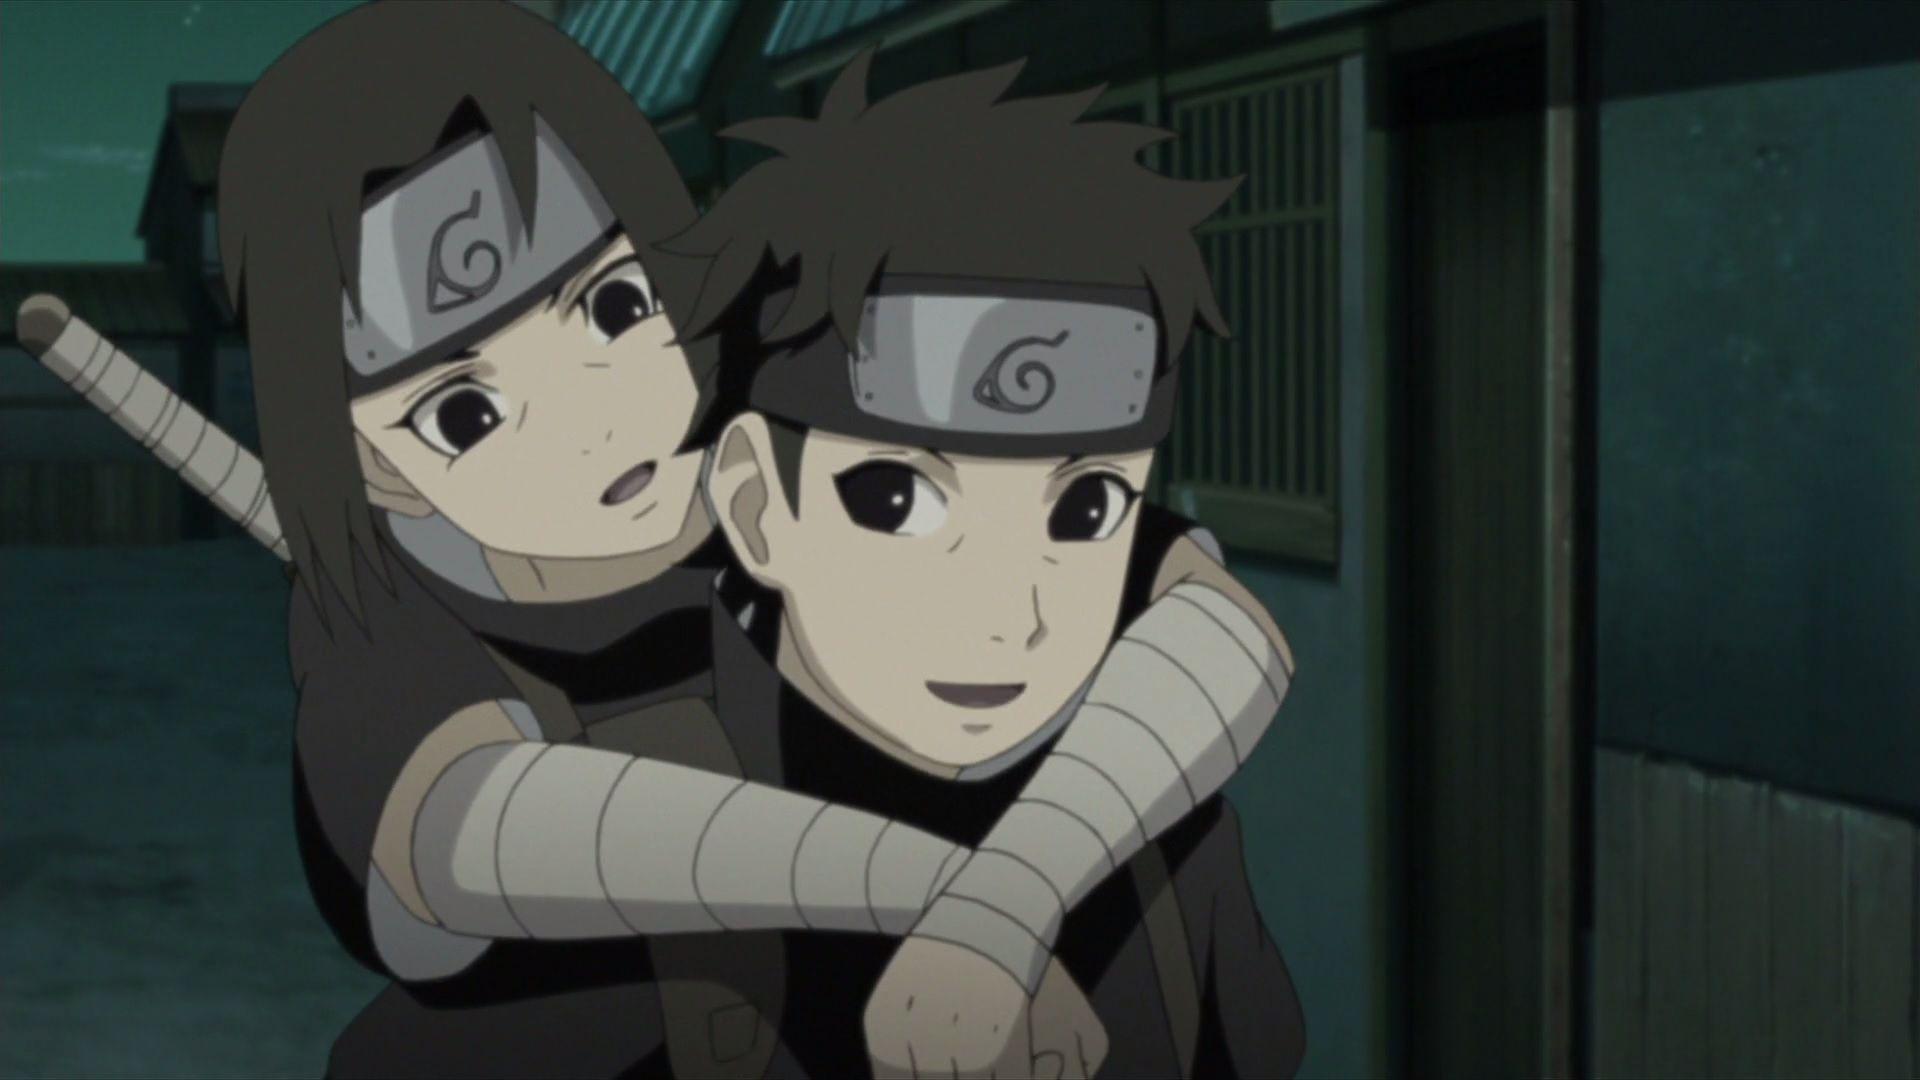 Shisui helps out Itachi. Daily Anime Art